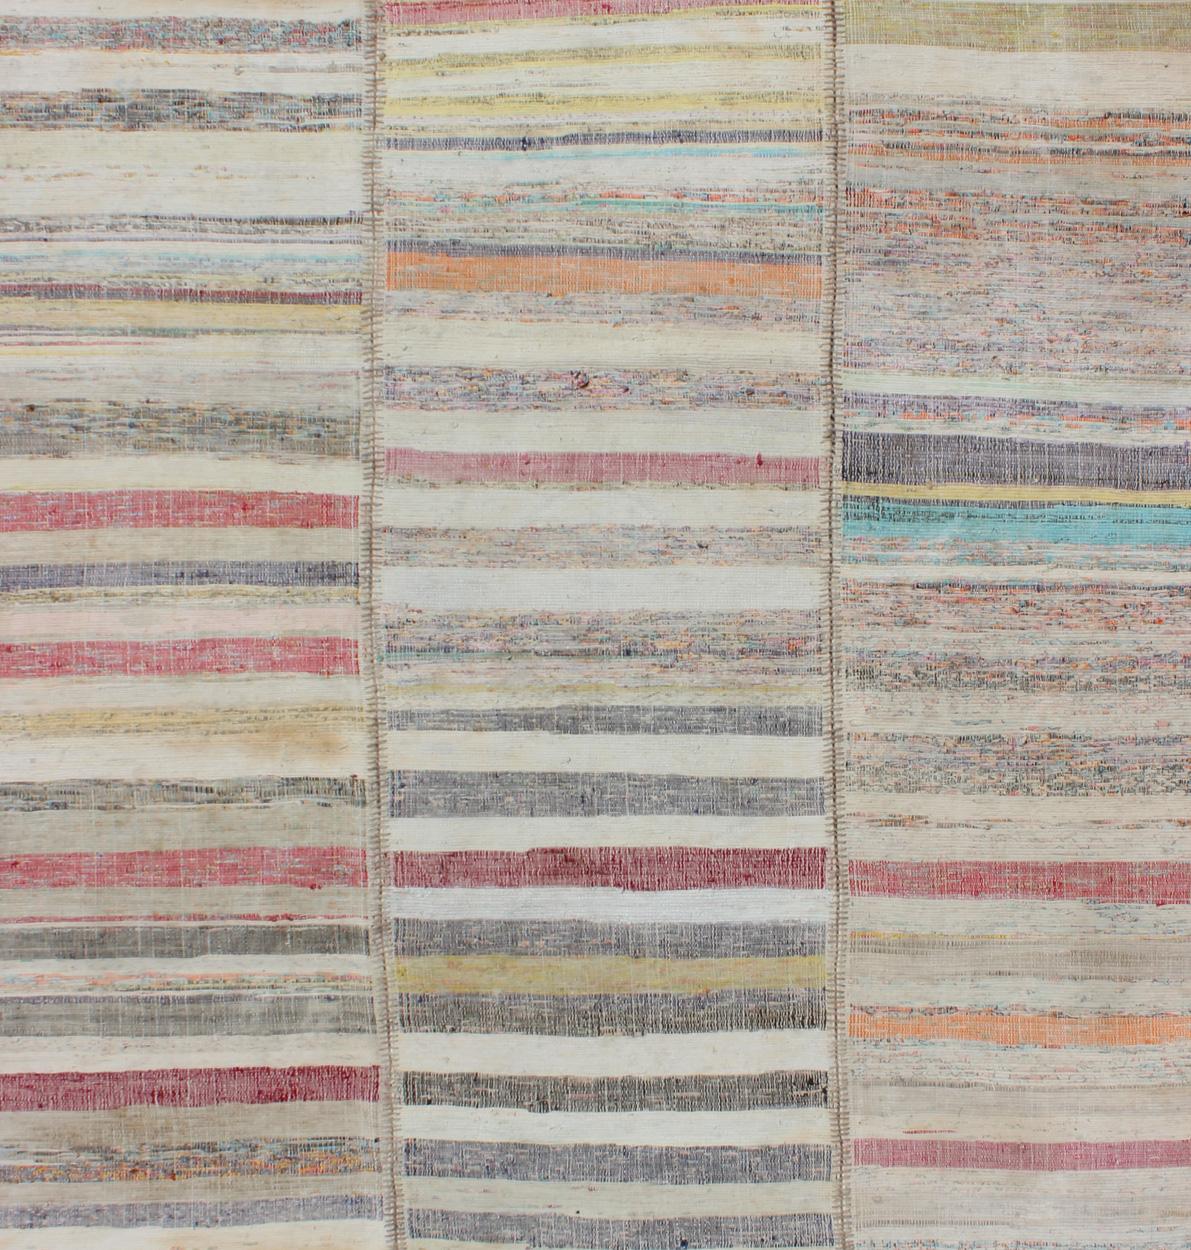 Hand-Knotted Multi-Panel Vintage Turkish Kilim Rug With Stripe Design in Multi Light Colors